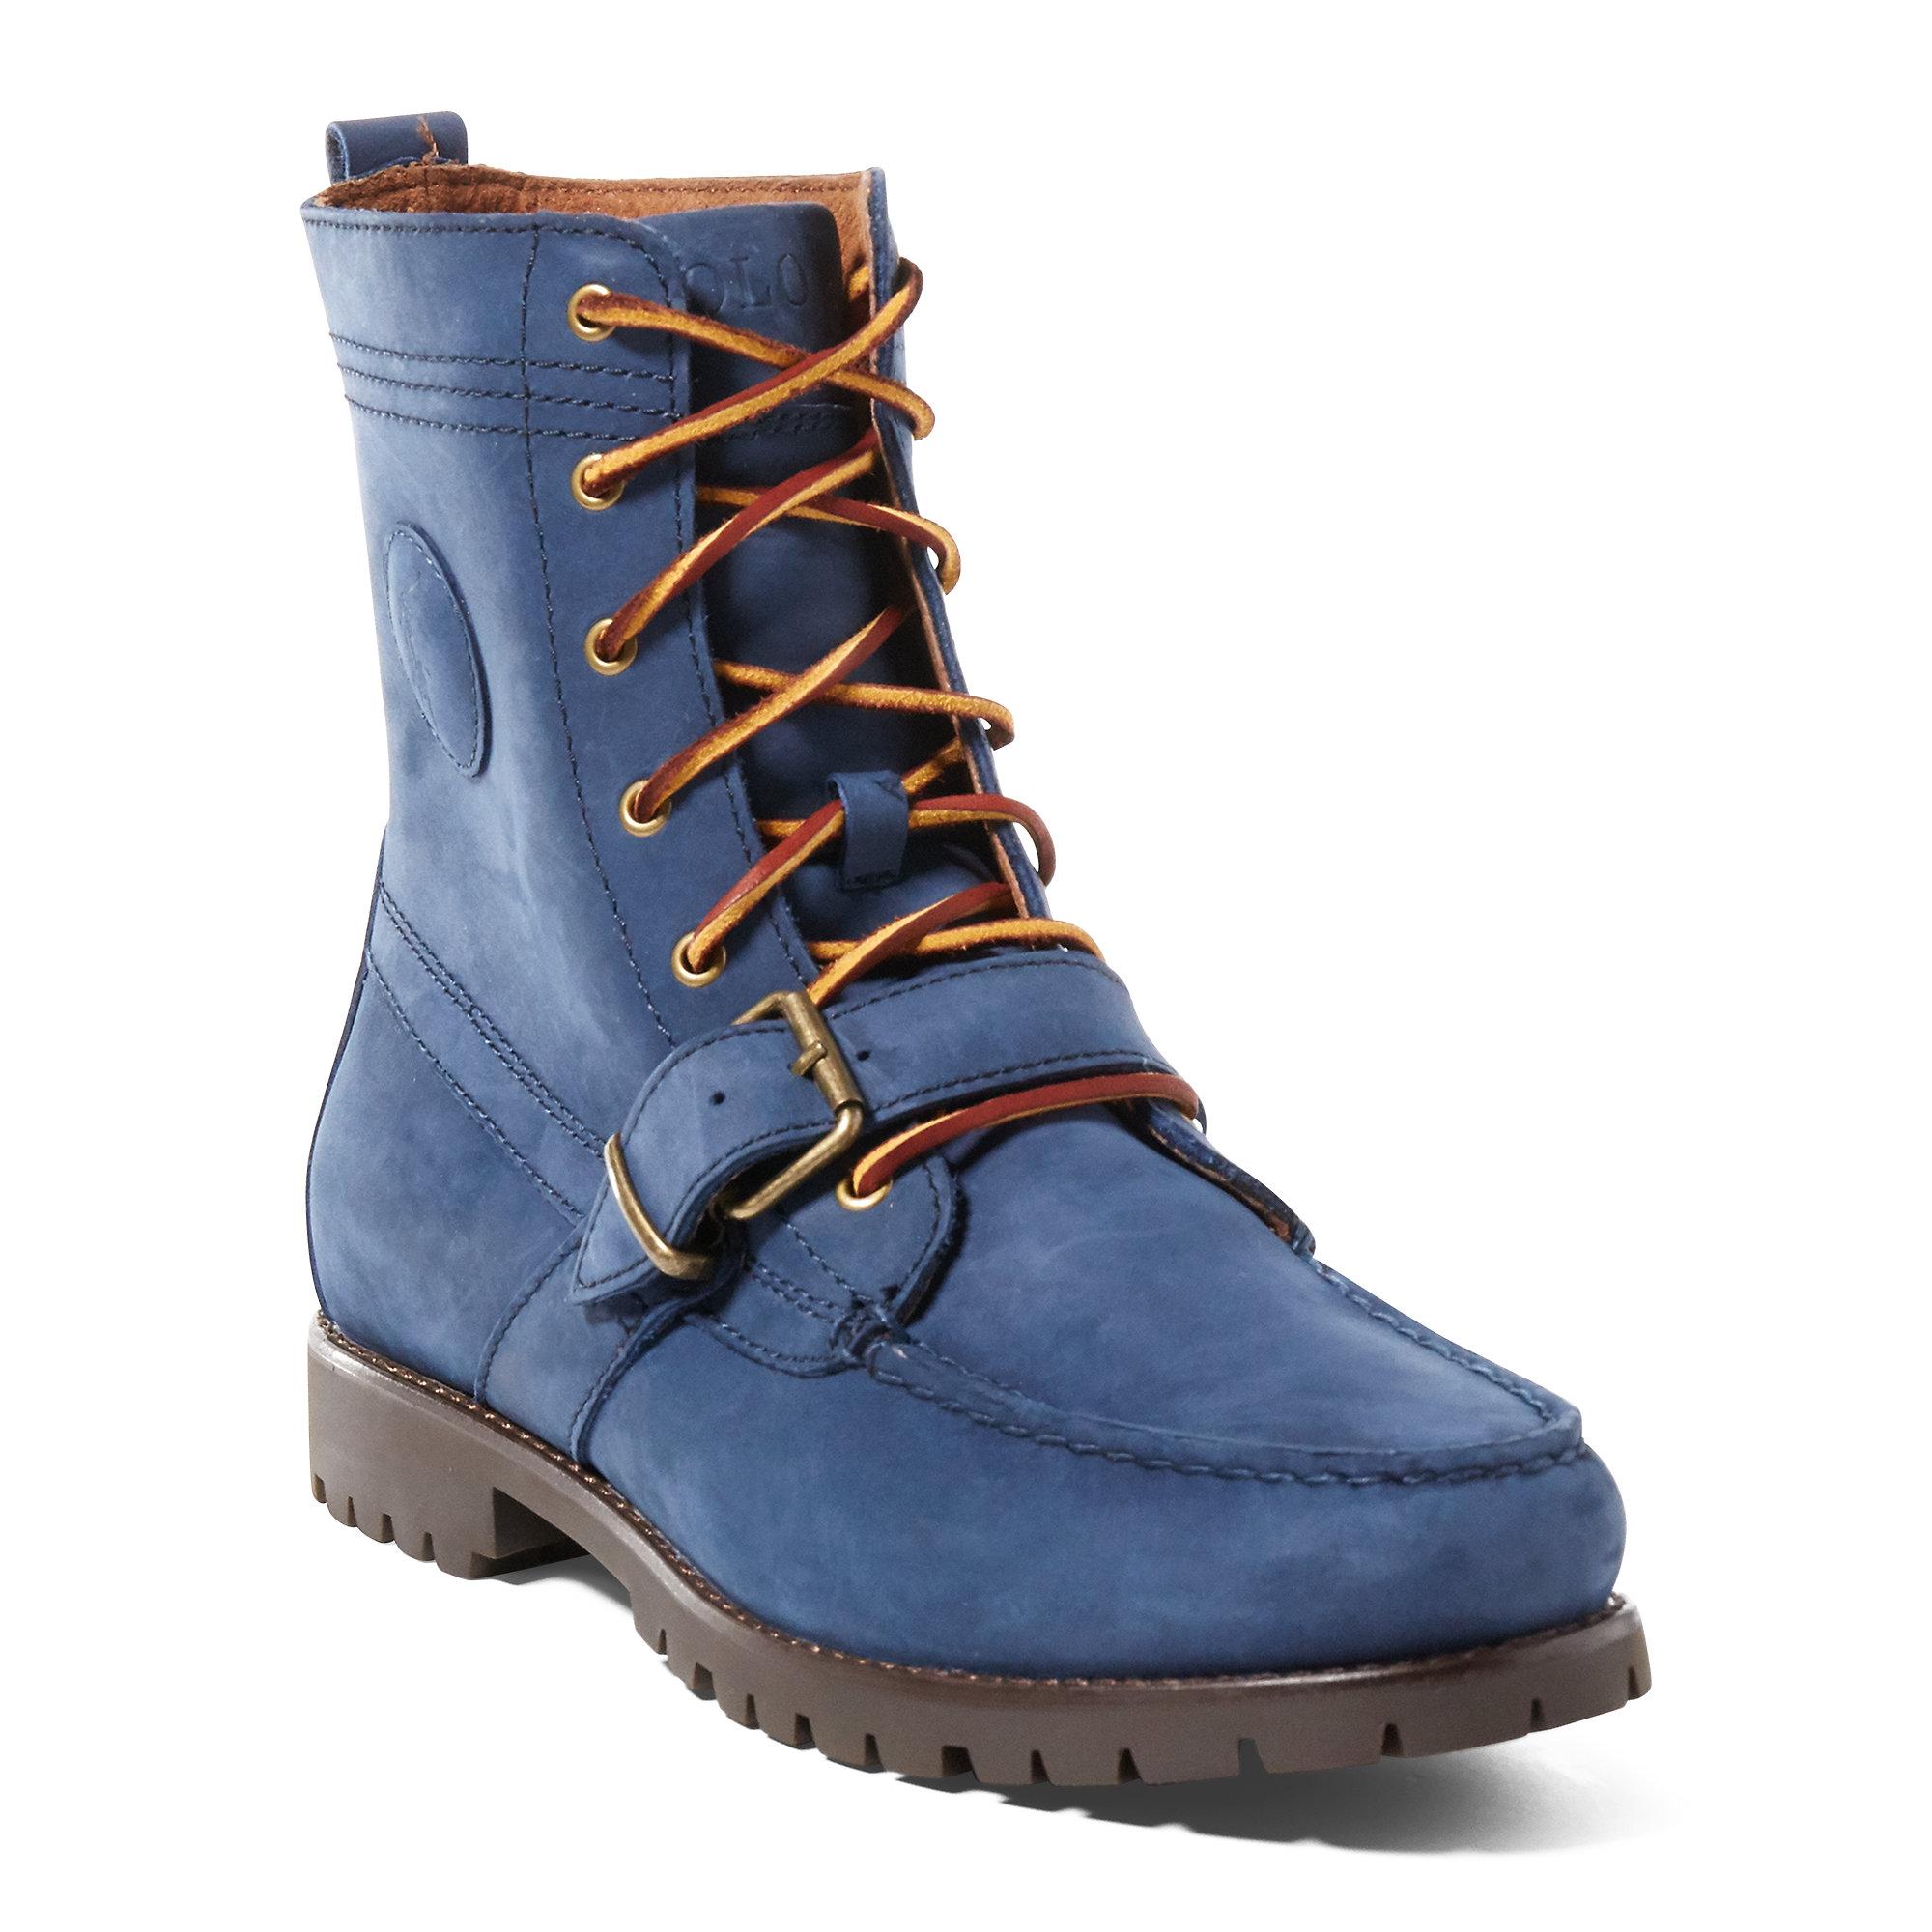 blue suede polo boots